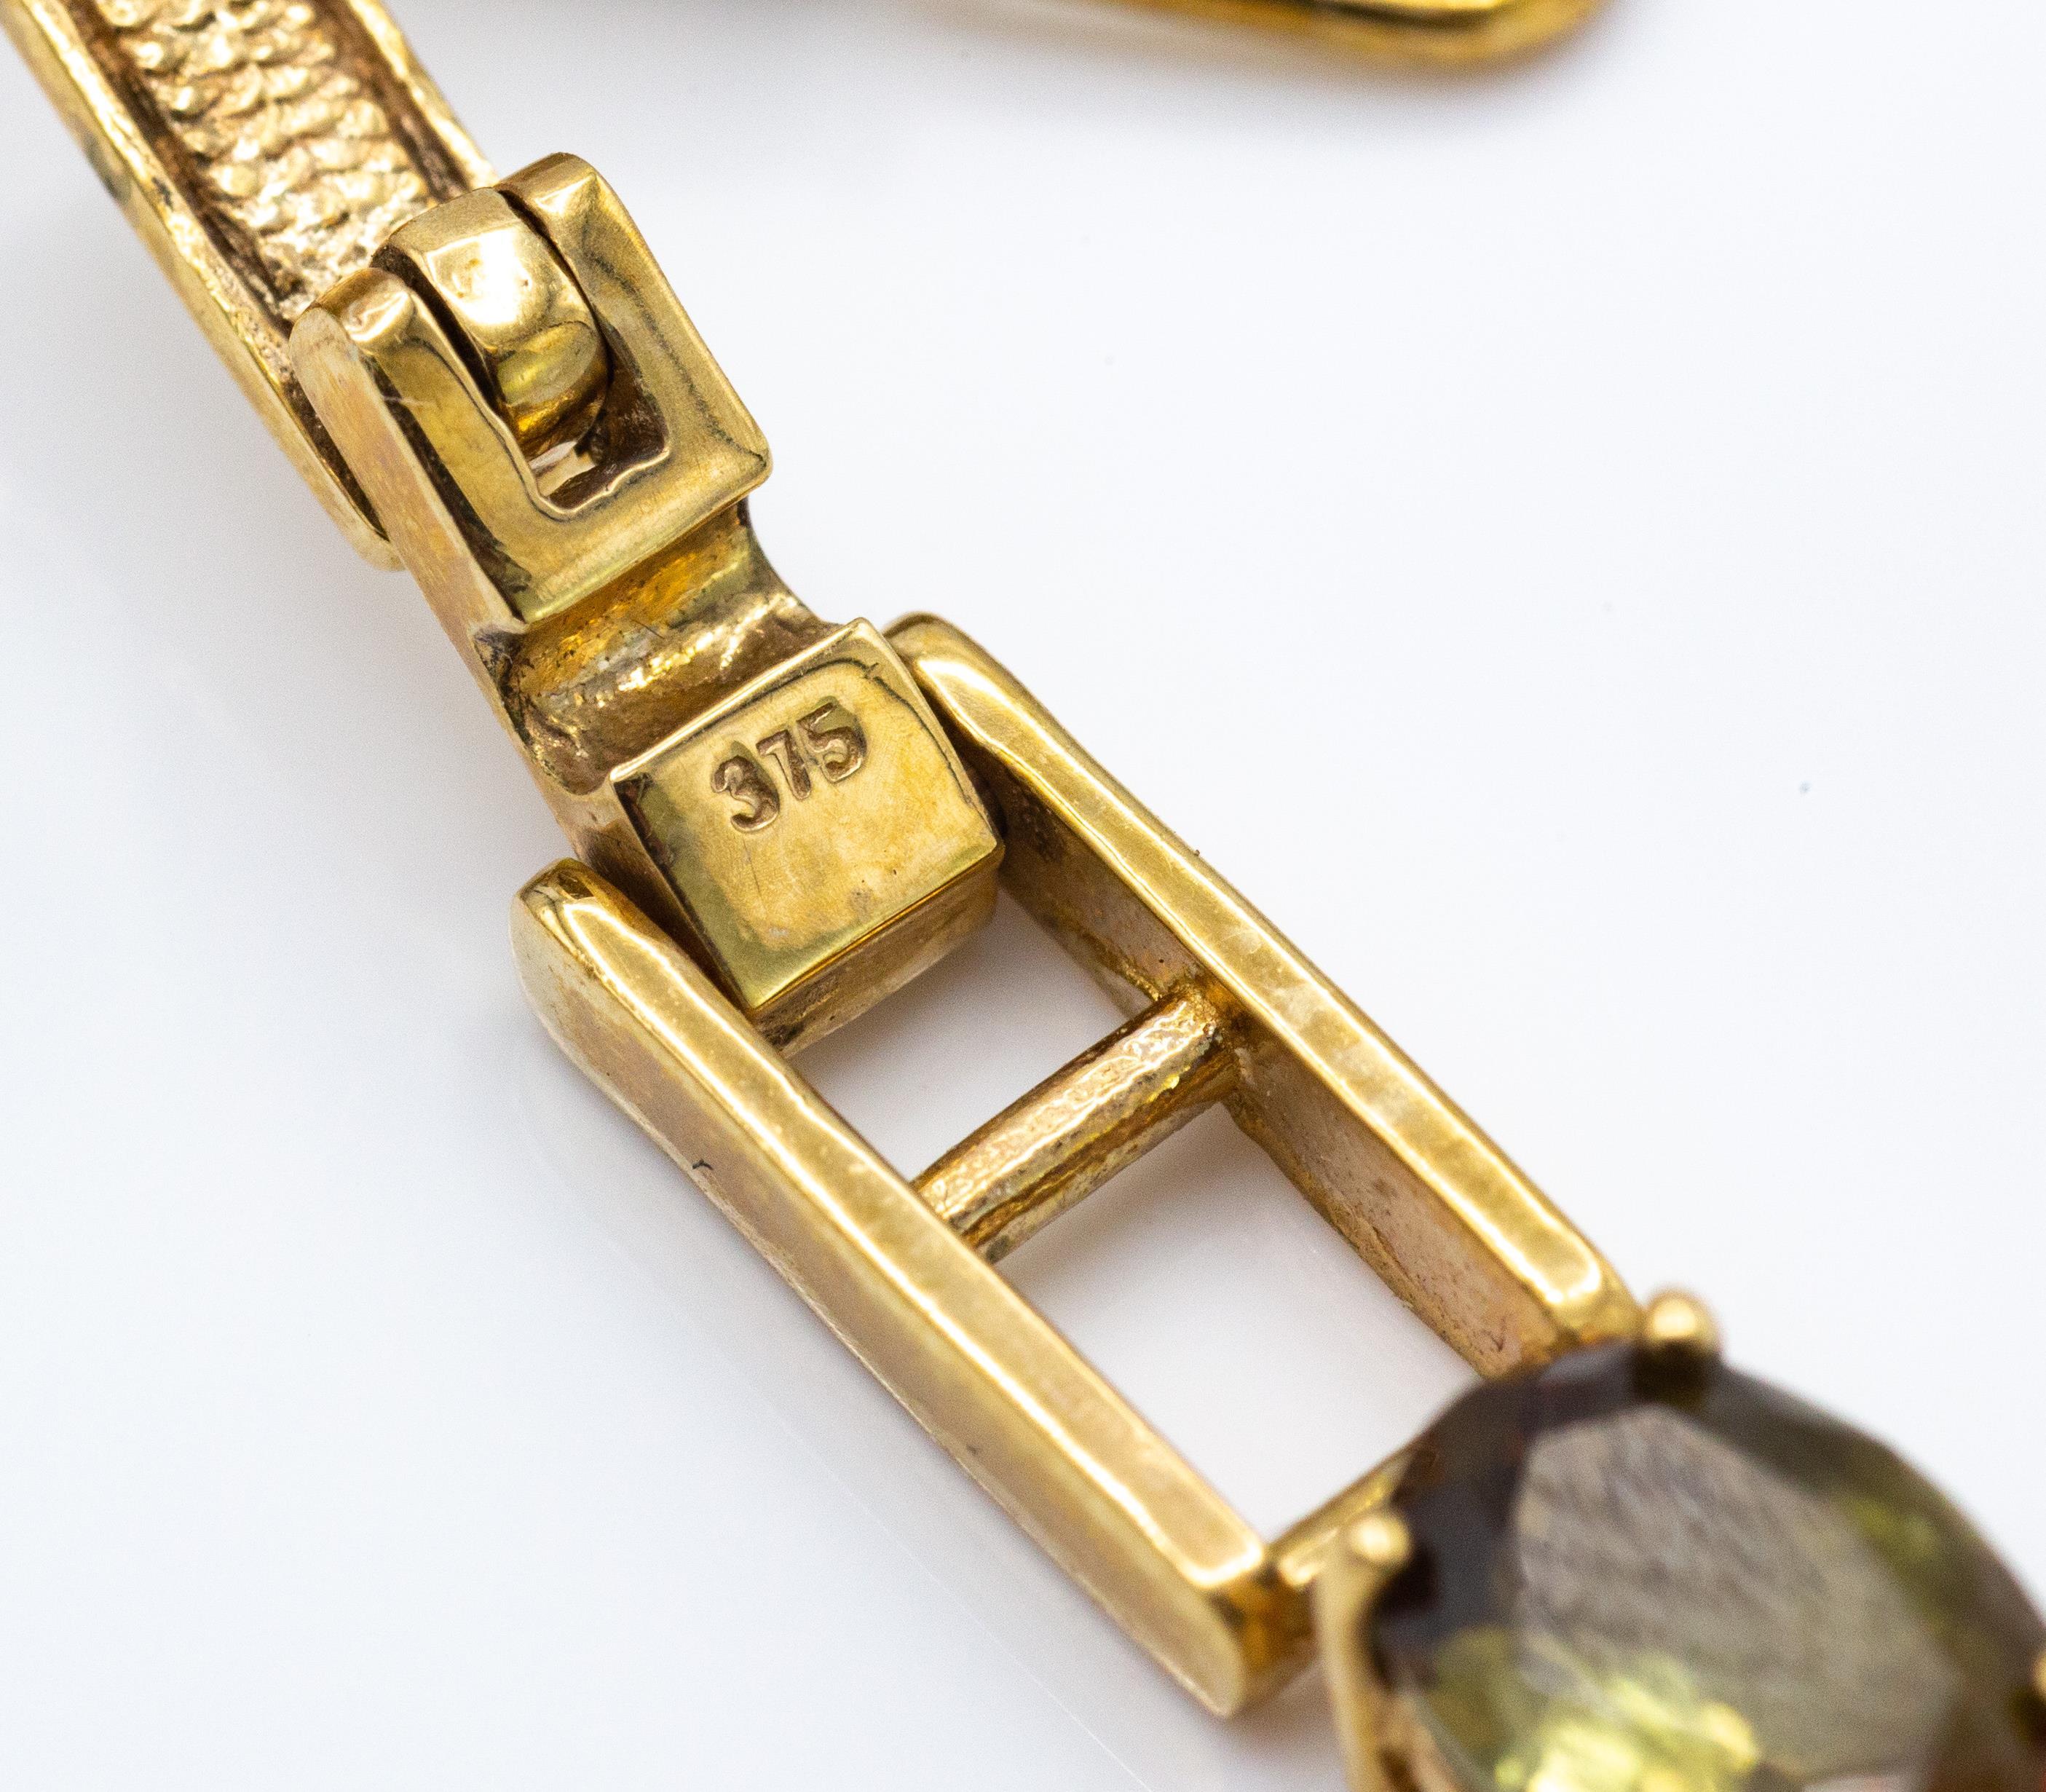 9ct Gold & Brazilian Andalusite Bracelet - Image 3 of 4